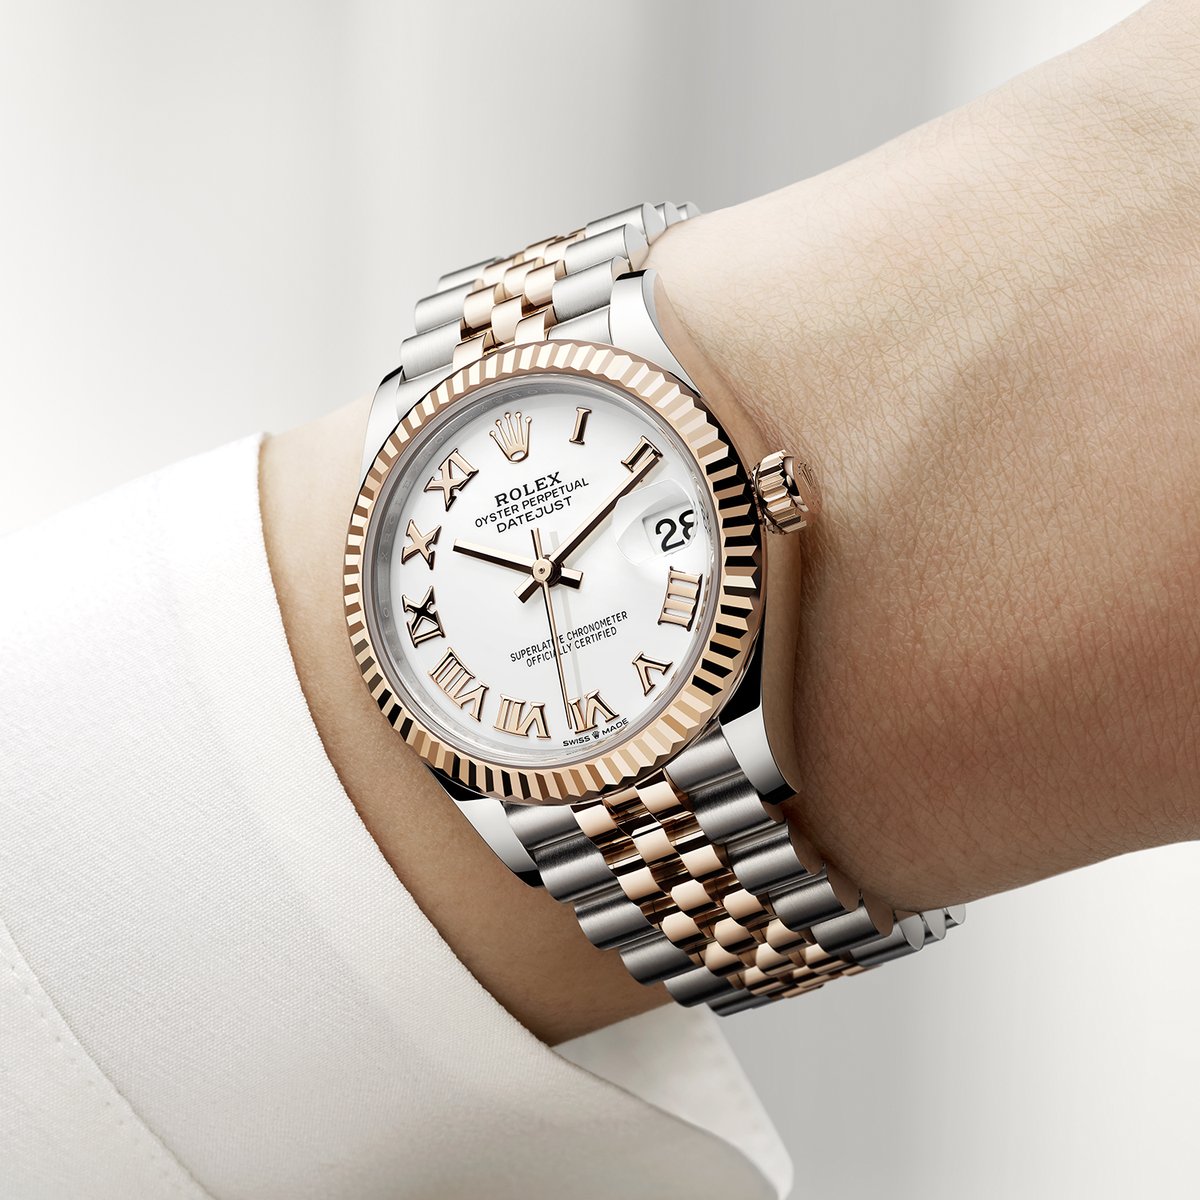 Lux Bond &amp; Green on Twitter: &quot;The classic feminine watch. The Rolex Lady-Datejust in Oystersteel and Everose gold, 28 mm case, white dial, a Jubilee bracelet. #Rolex #LadyDatejust #LuxBondGreen #EveryBoxHasAStory #WestHartford #MoheganSun #